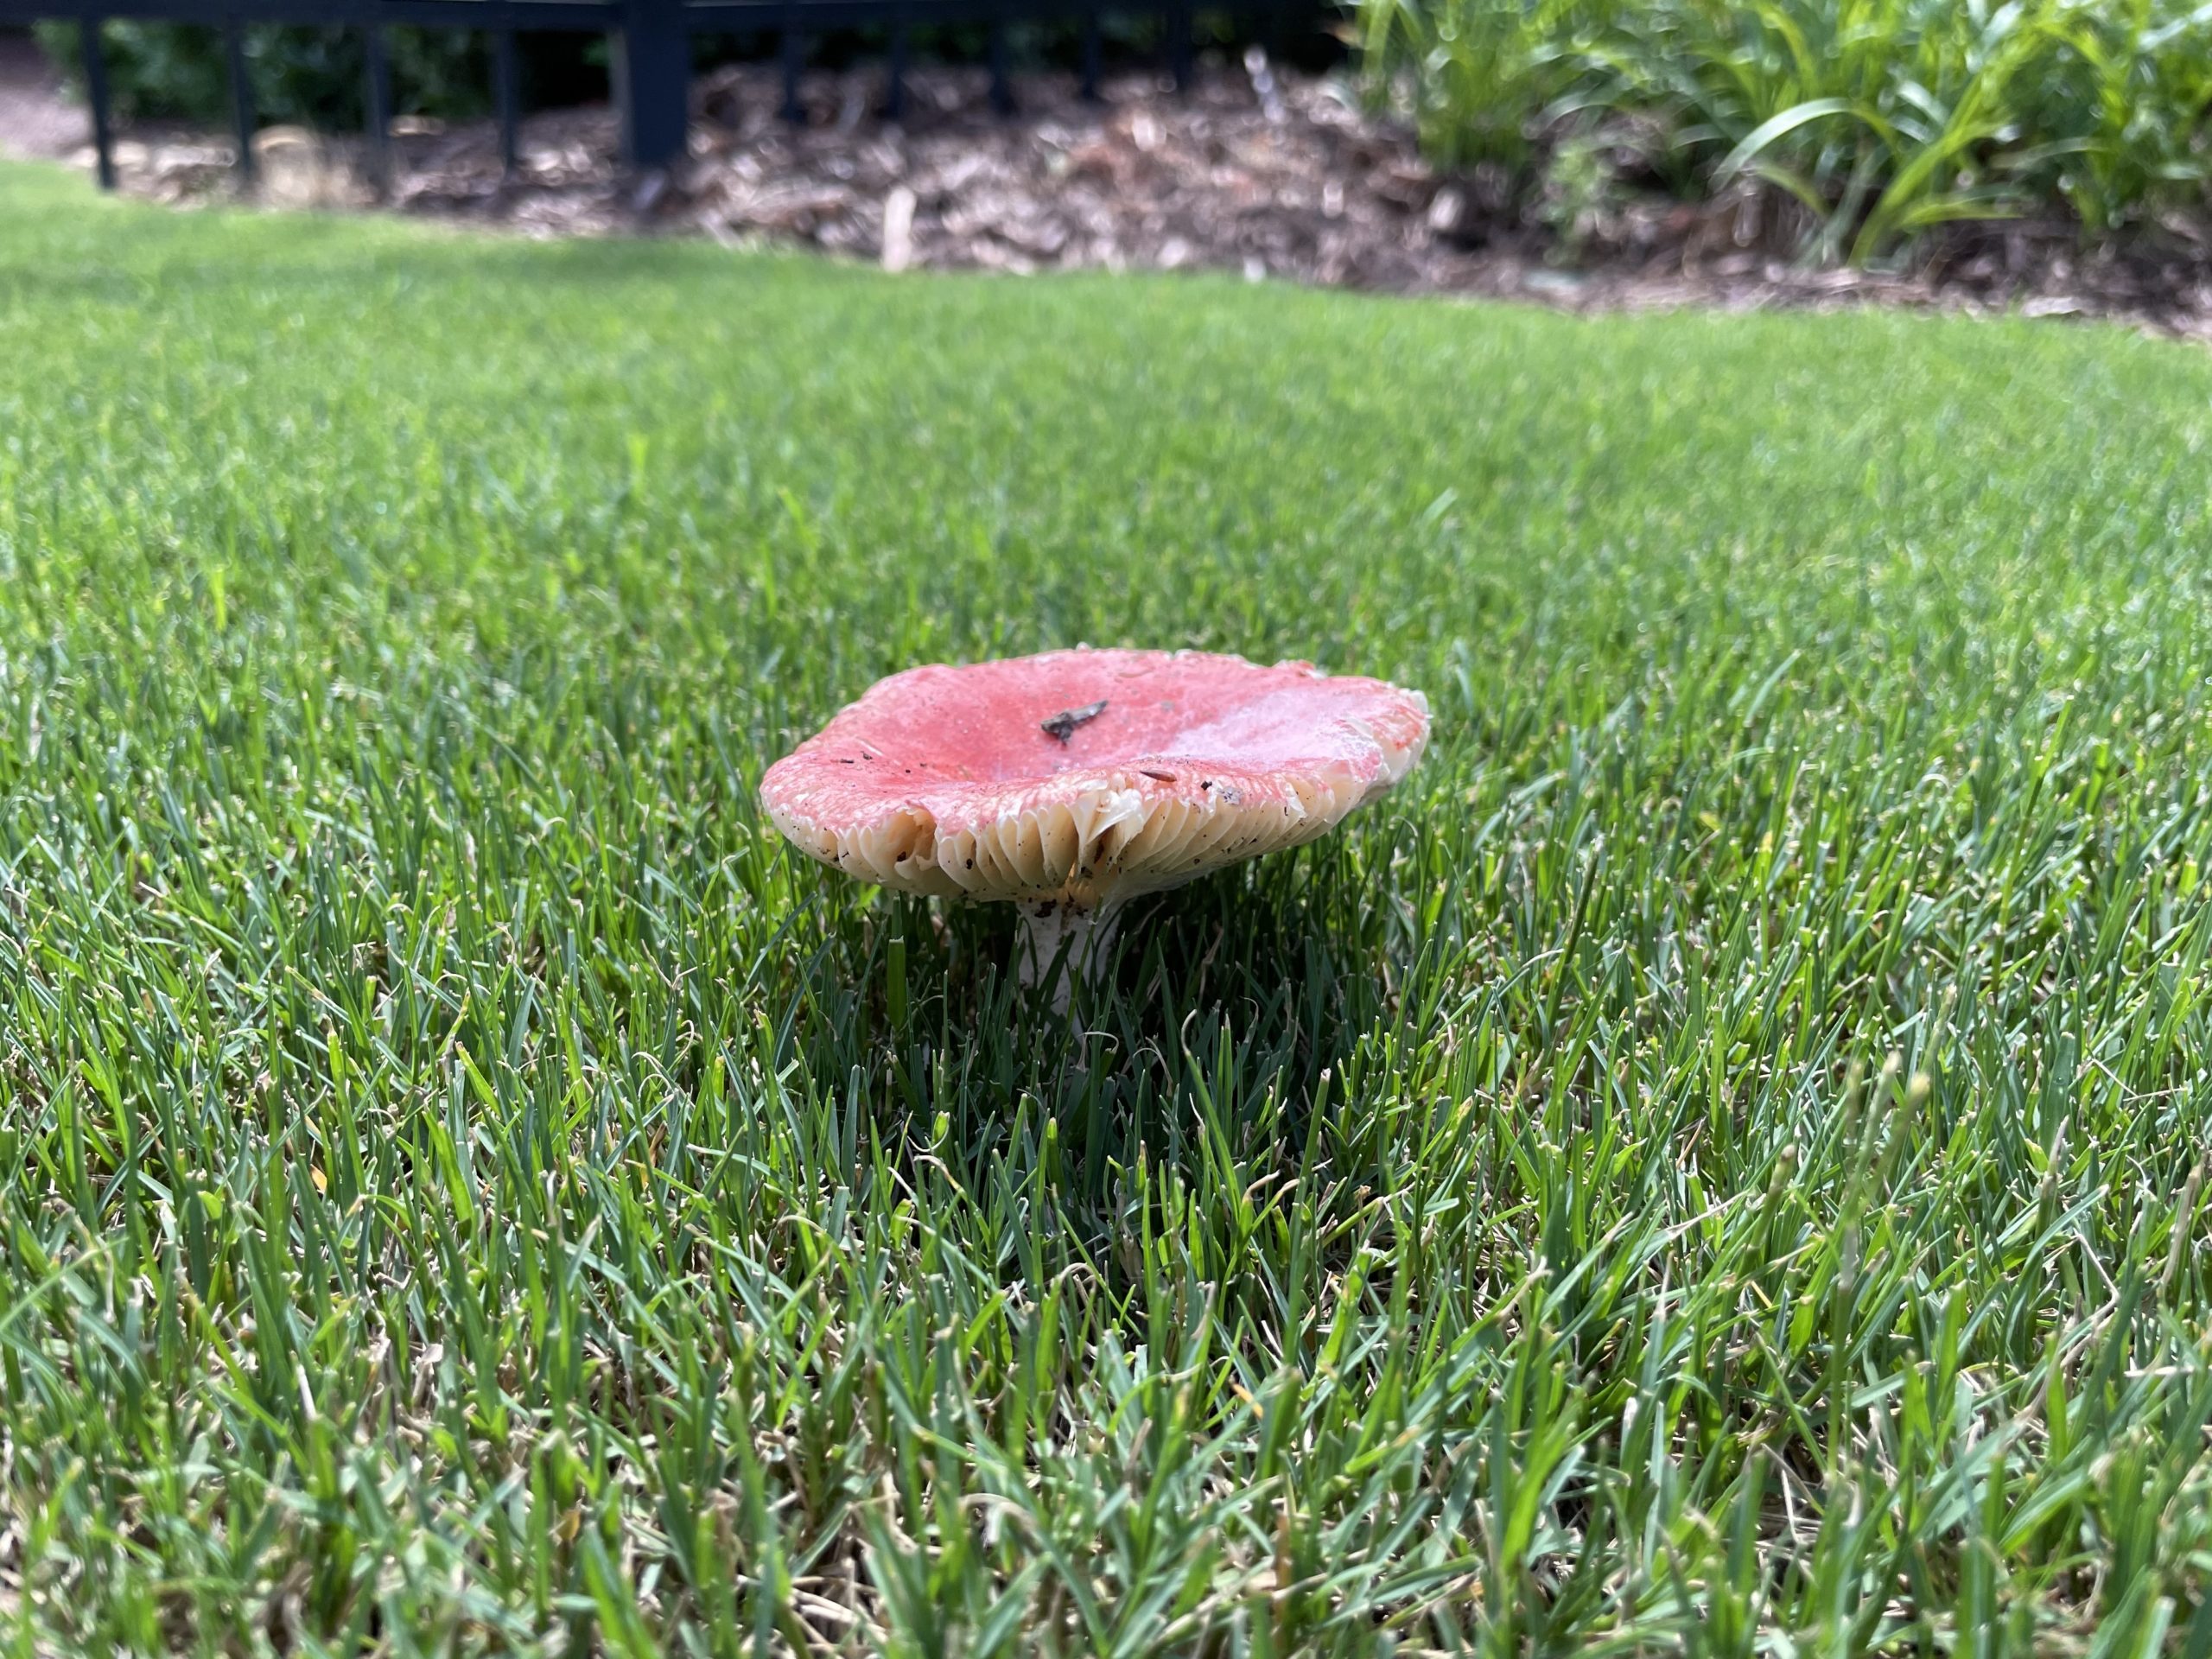 Why Do I Have Mushrooms In My Lawn?